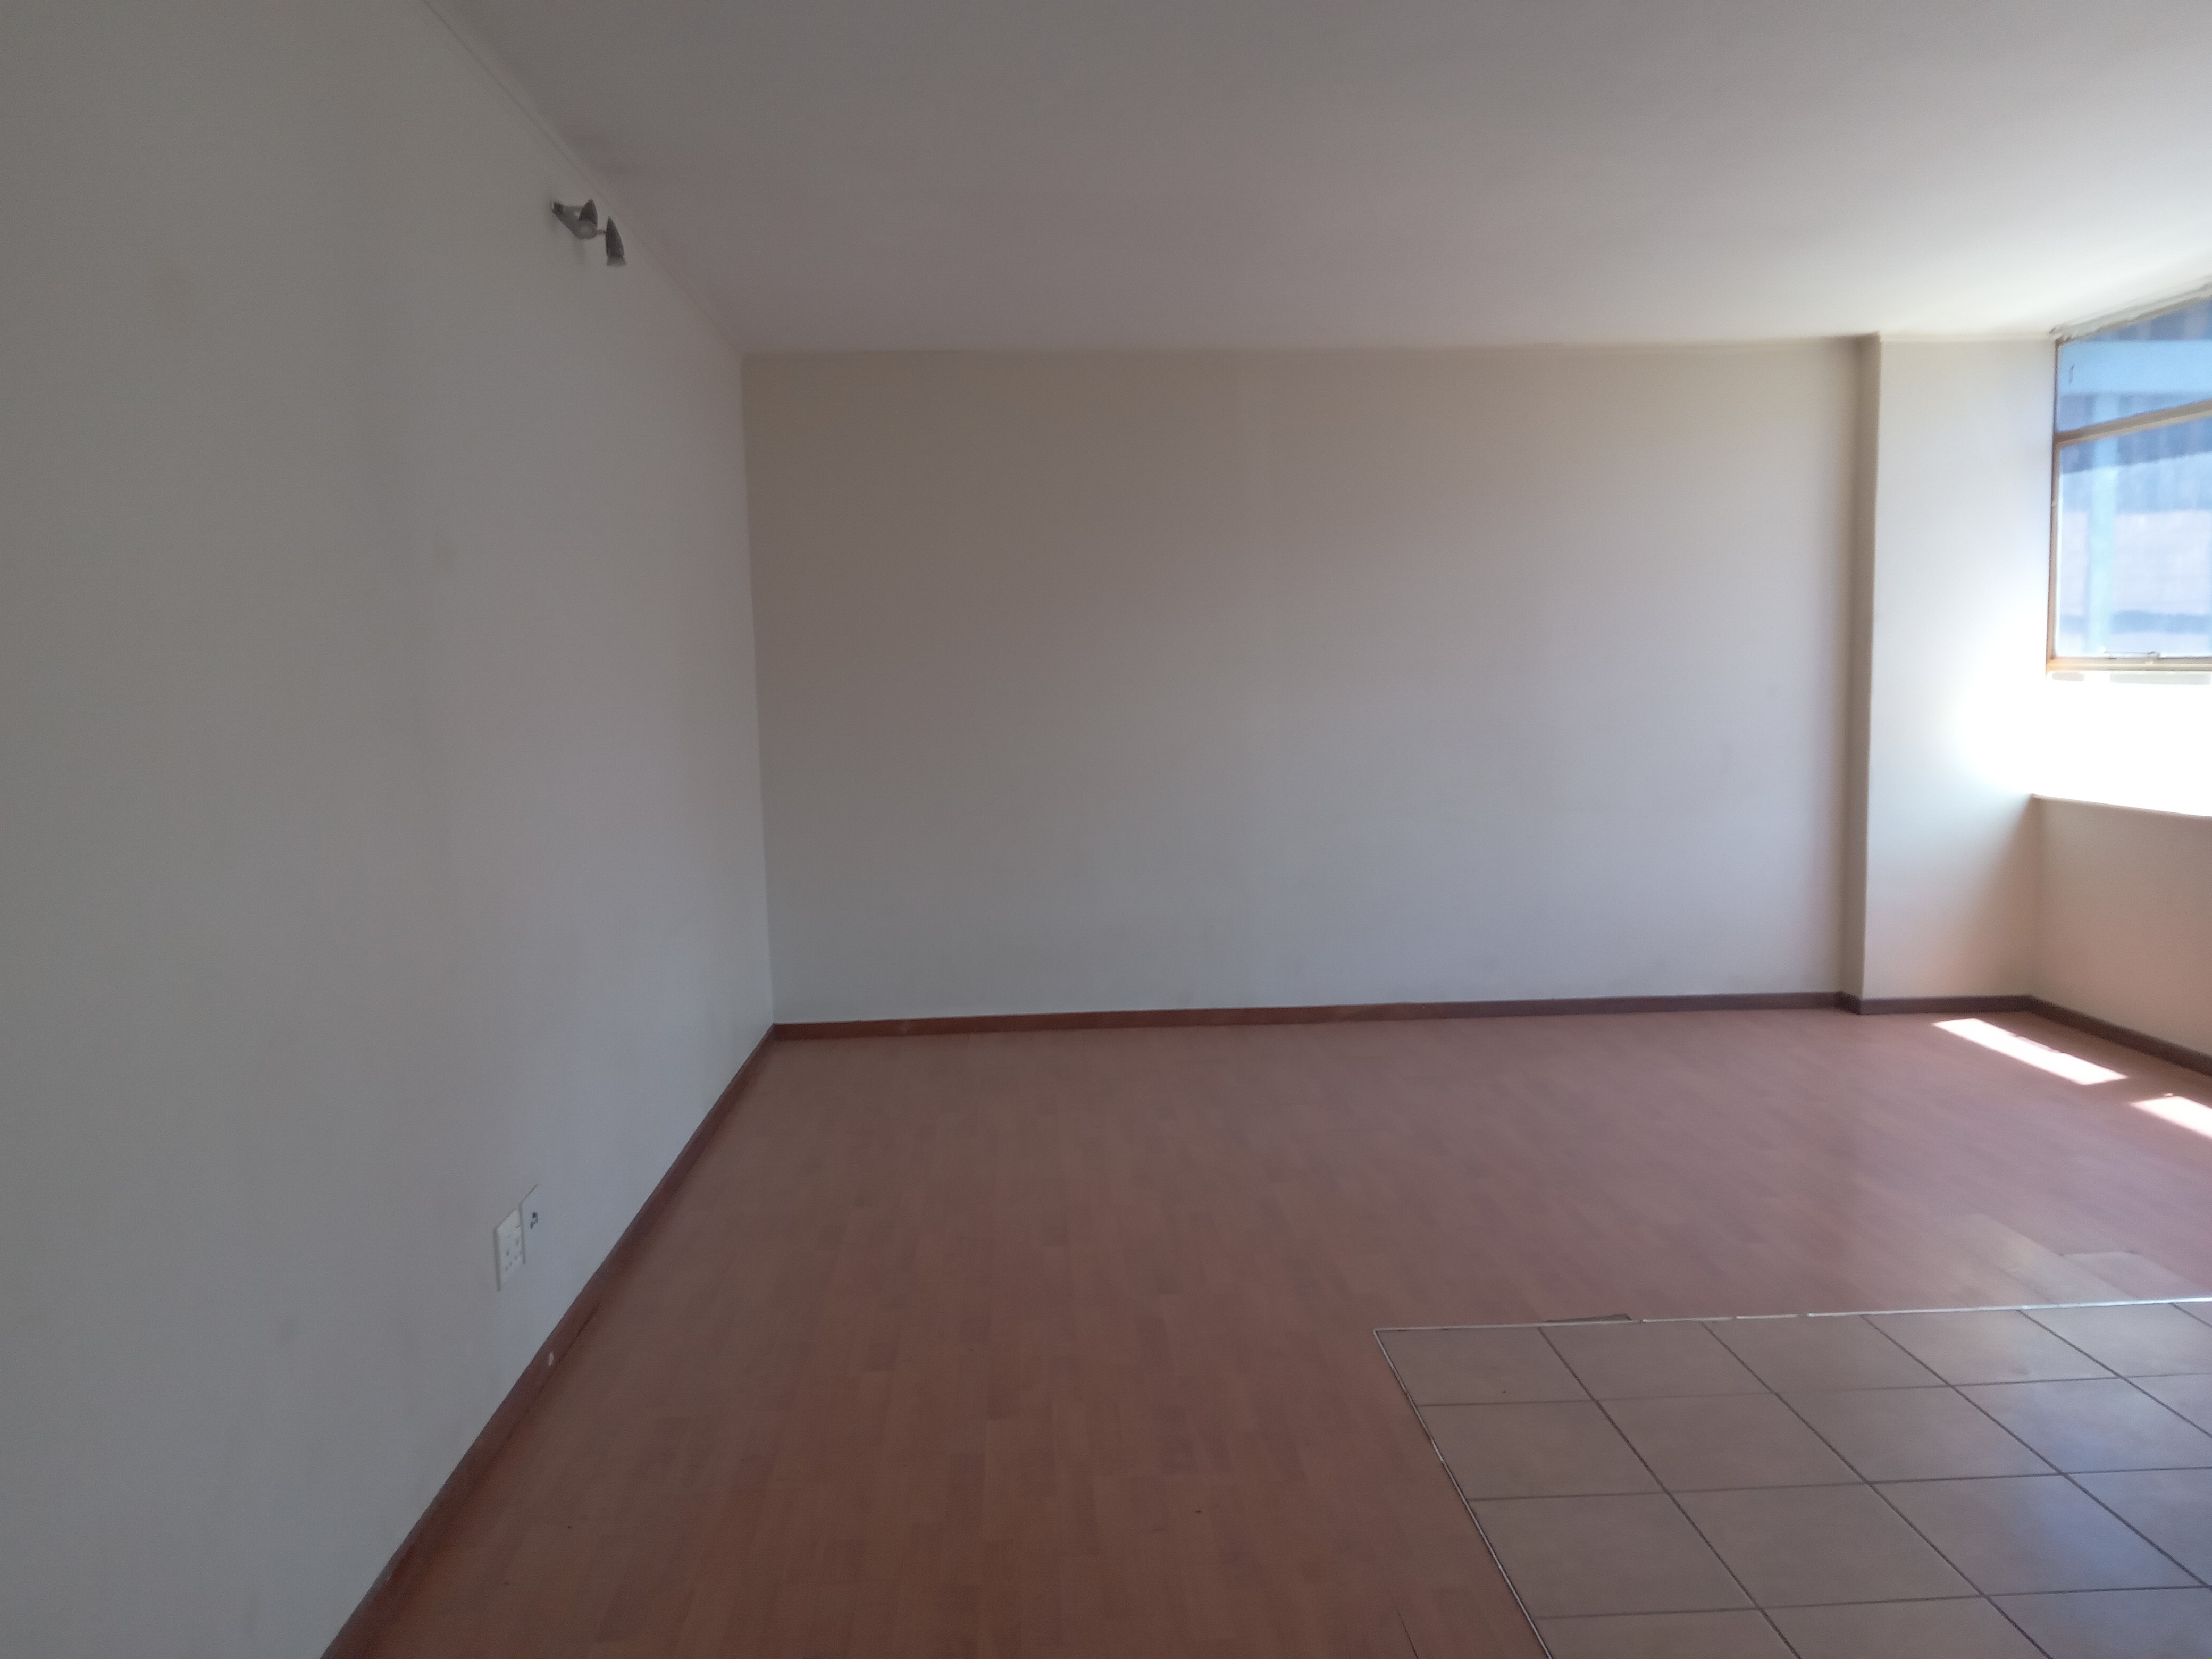 To Let 1 Bedroom Property for Rent in City and Suburban Gauteng